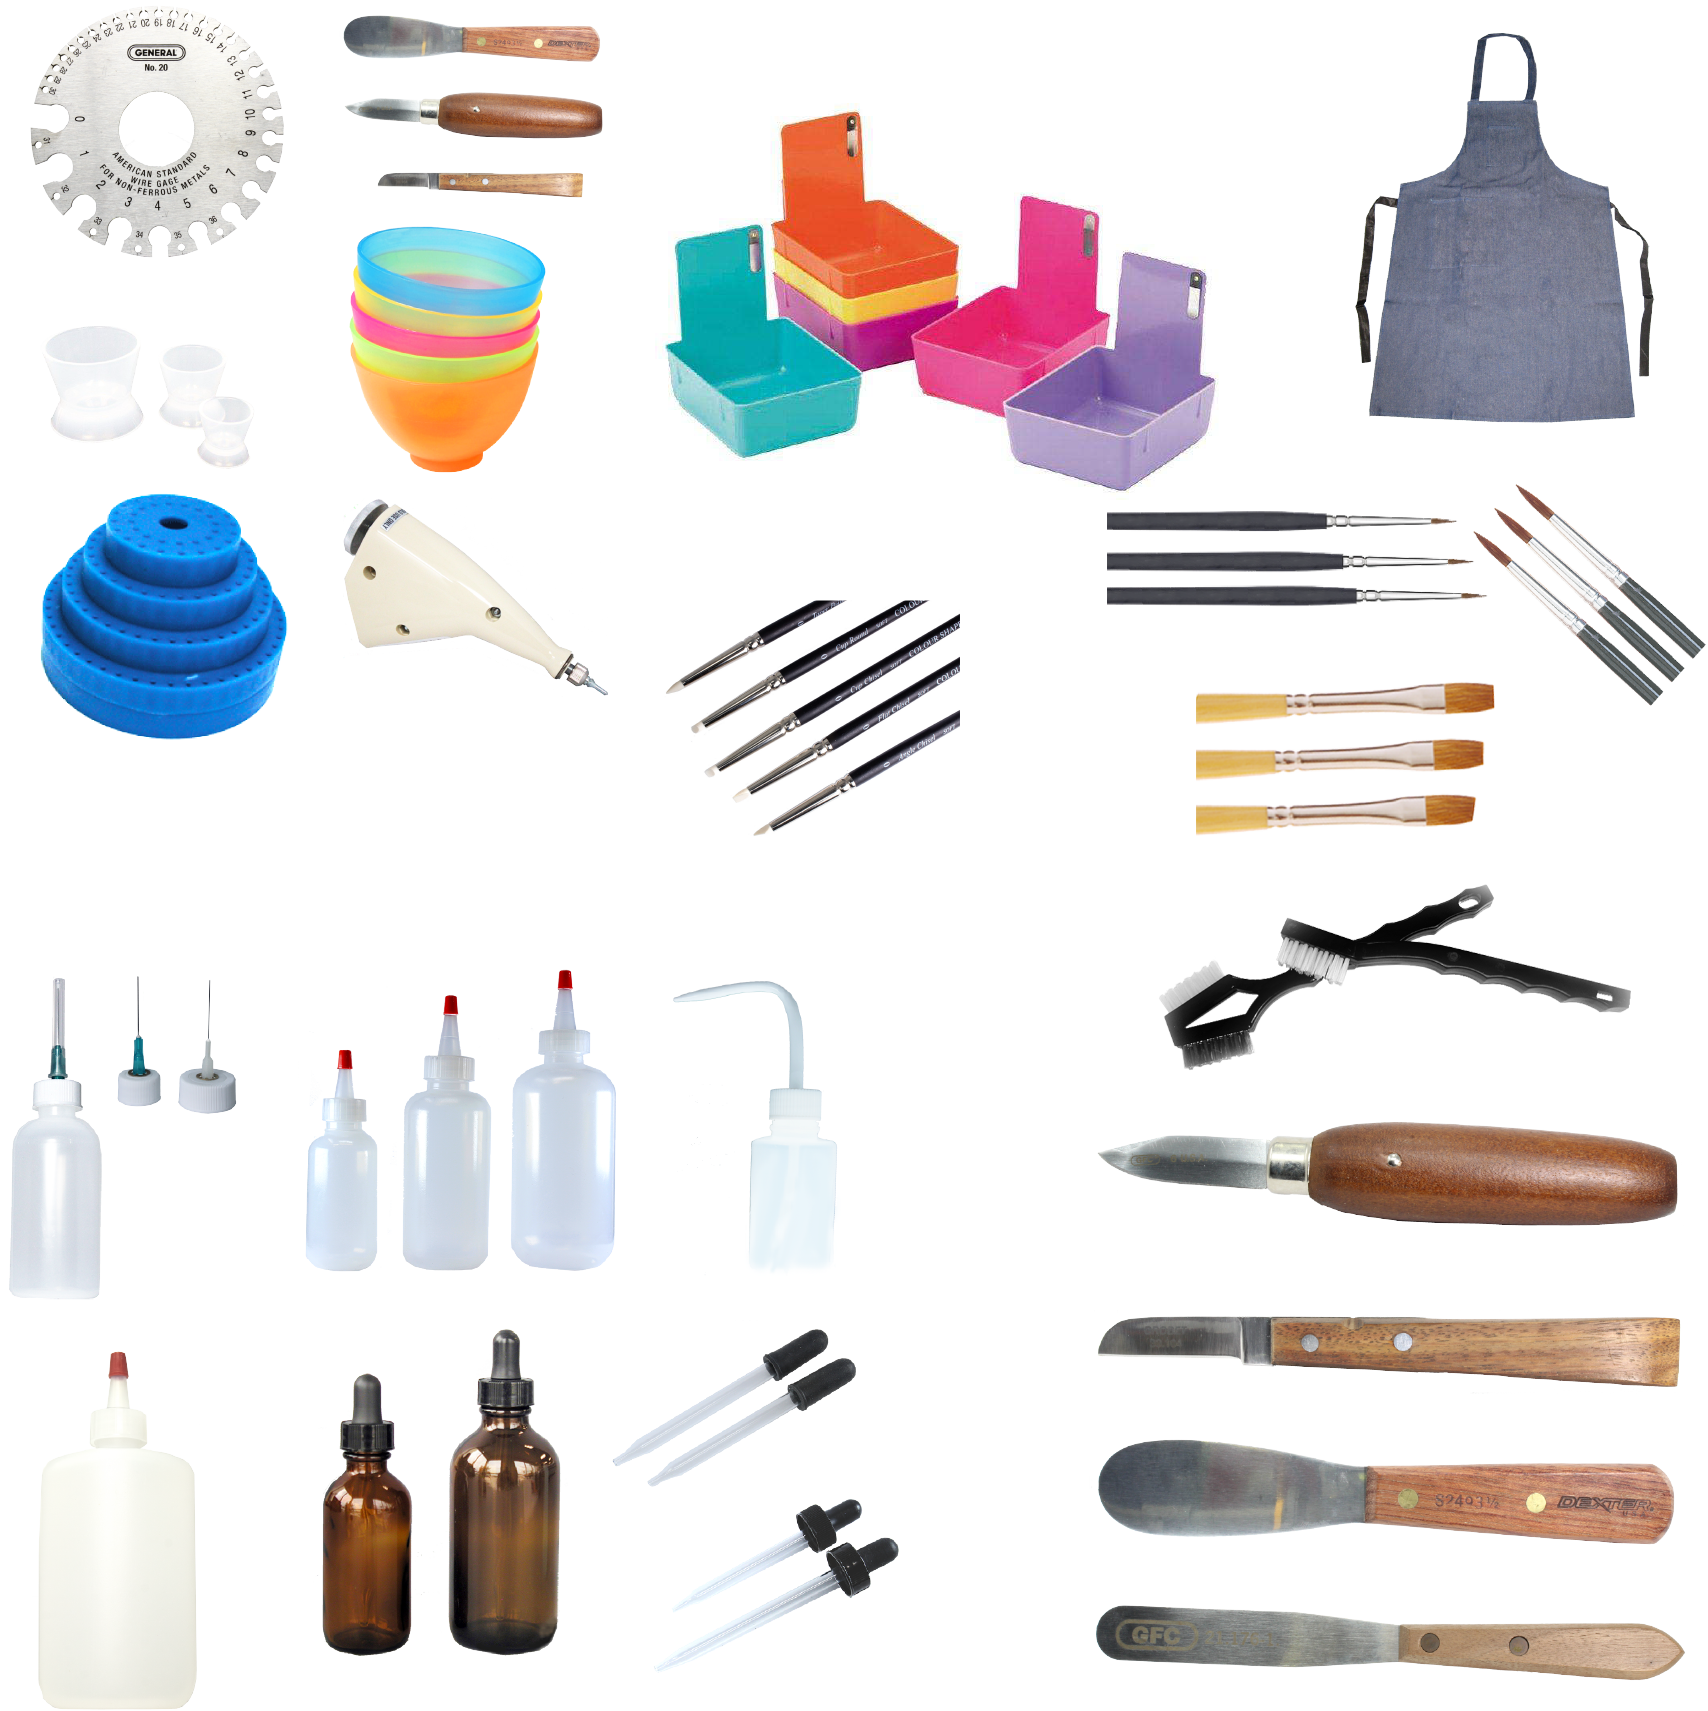 images/200 Laboratory Supplies and Tools Collage 333.png